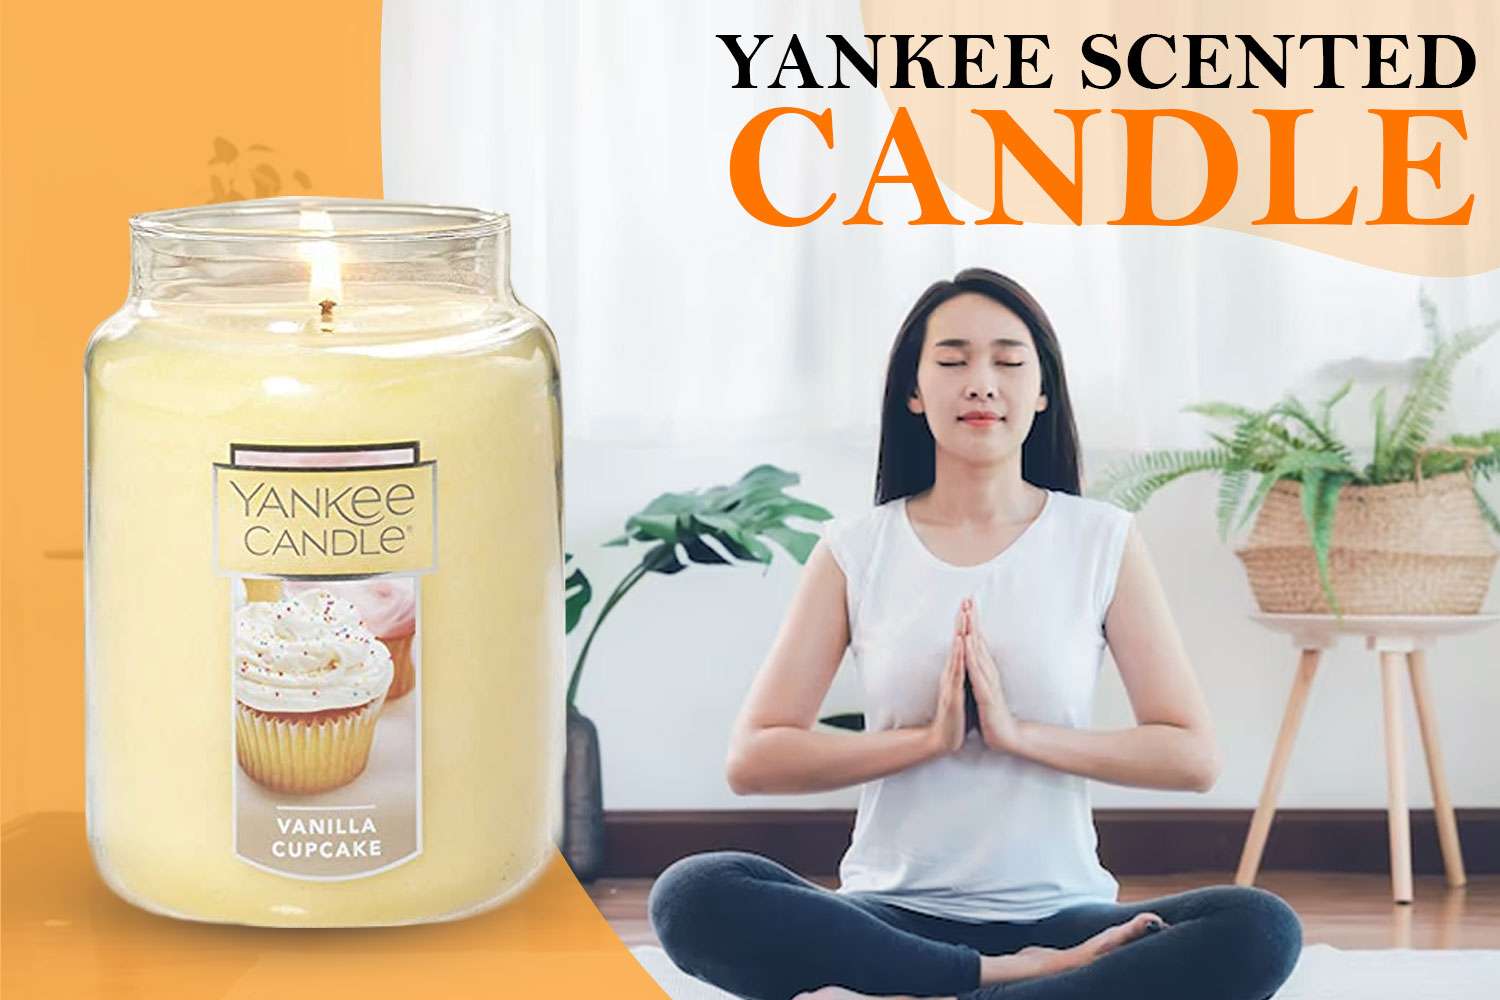 Yankee scented candle